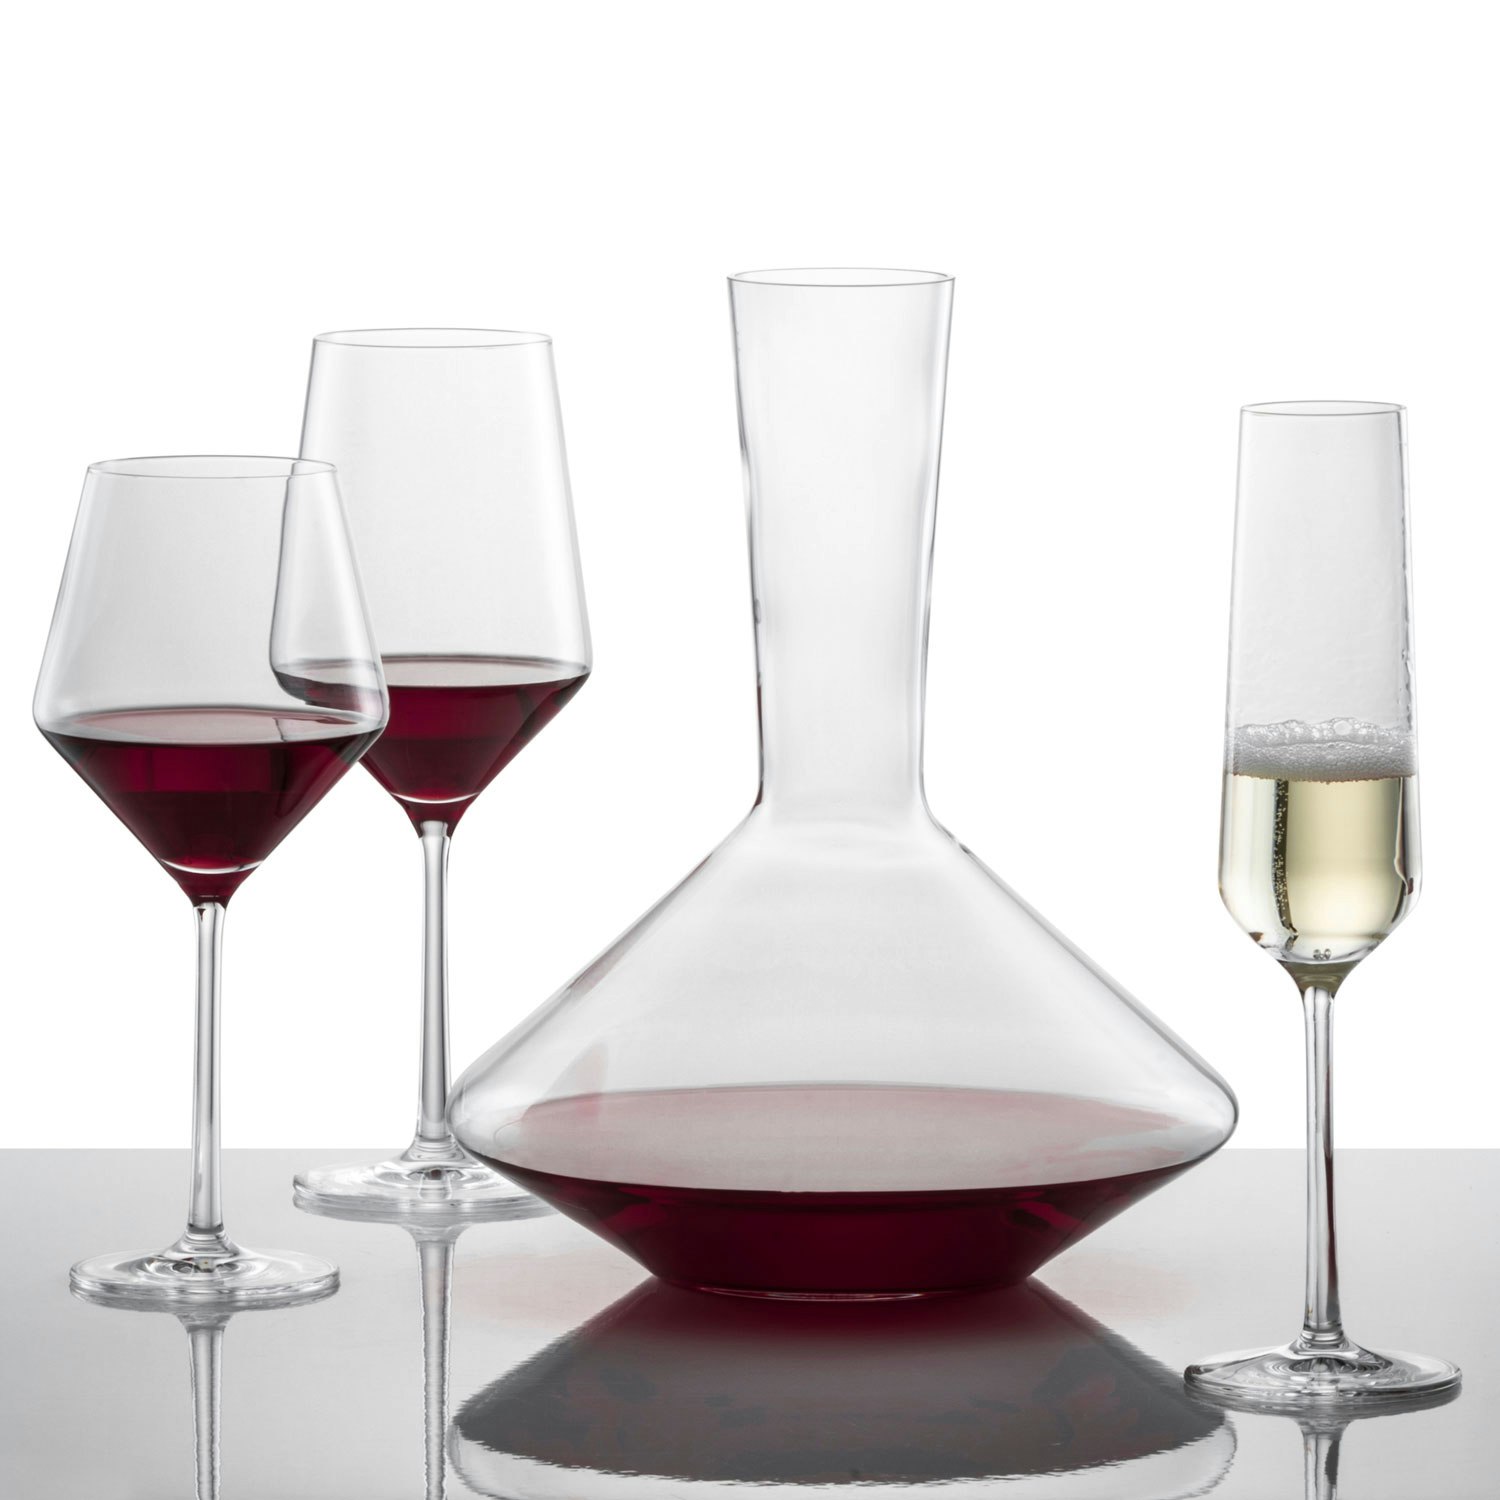 https://royaldesign.com/image/2/zwiesel-pure-burgundy-red-wine-glass-69-cl-2-pack-2